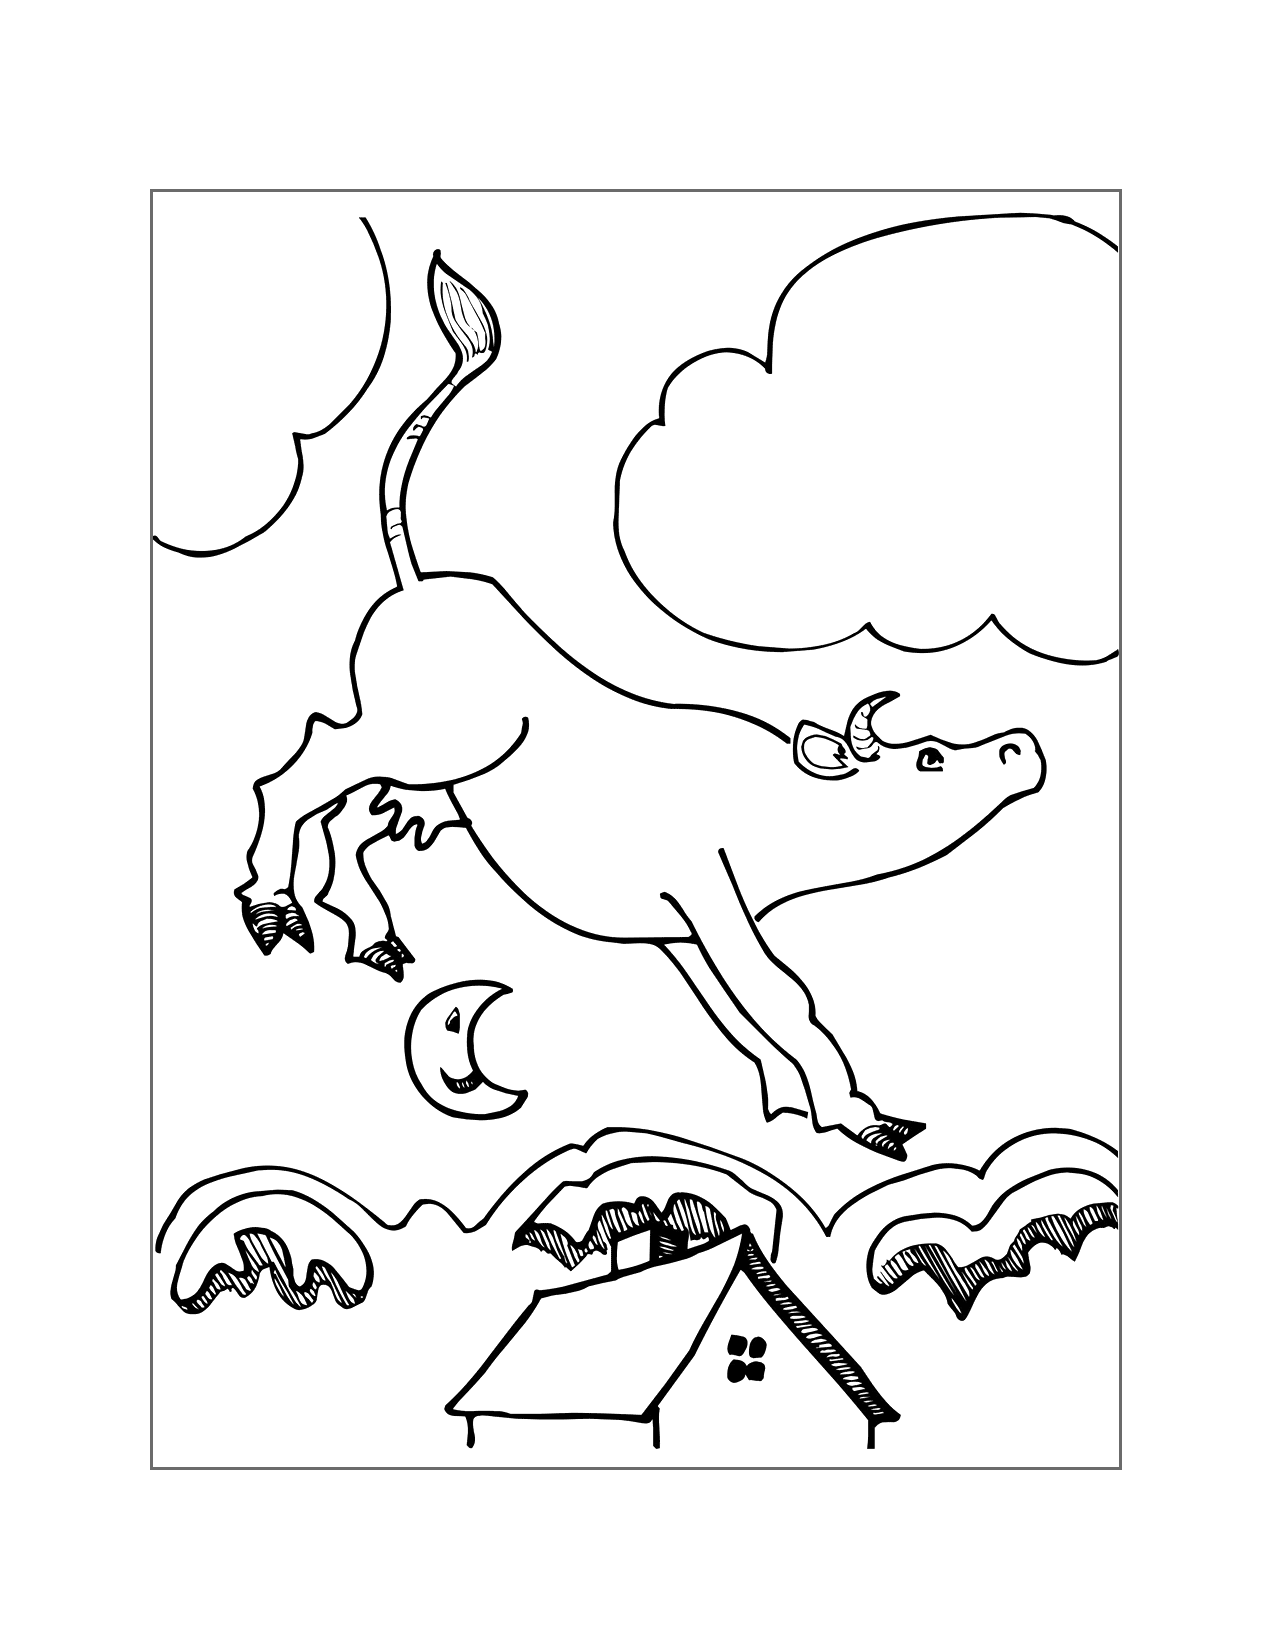 Cow Jumps Over The Moon Coloring Page